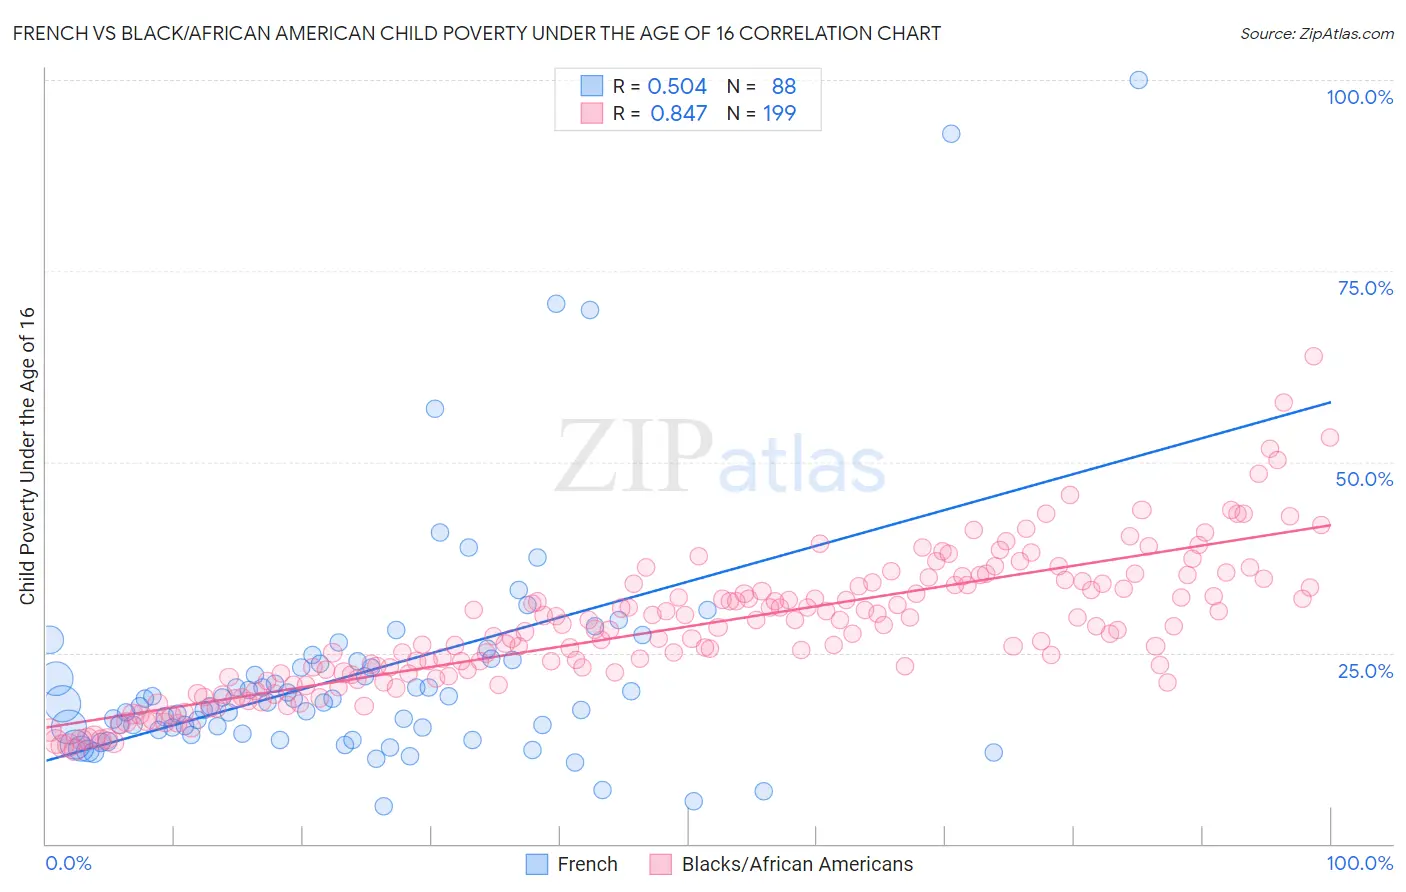 French vs Black/African American Child Poverty Under the Age of 16